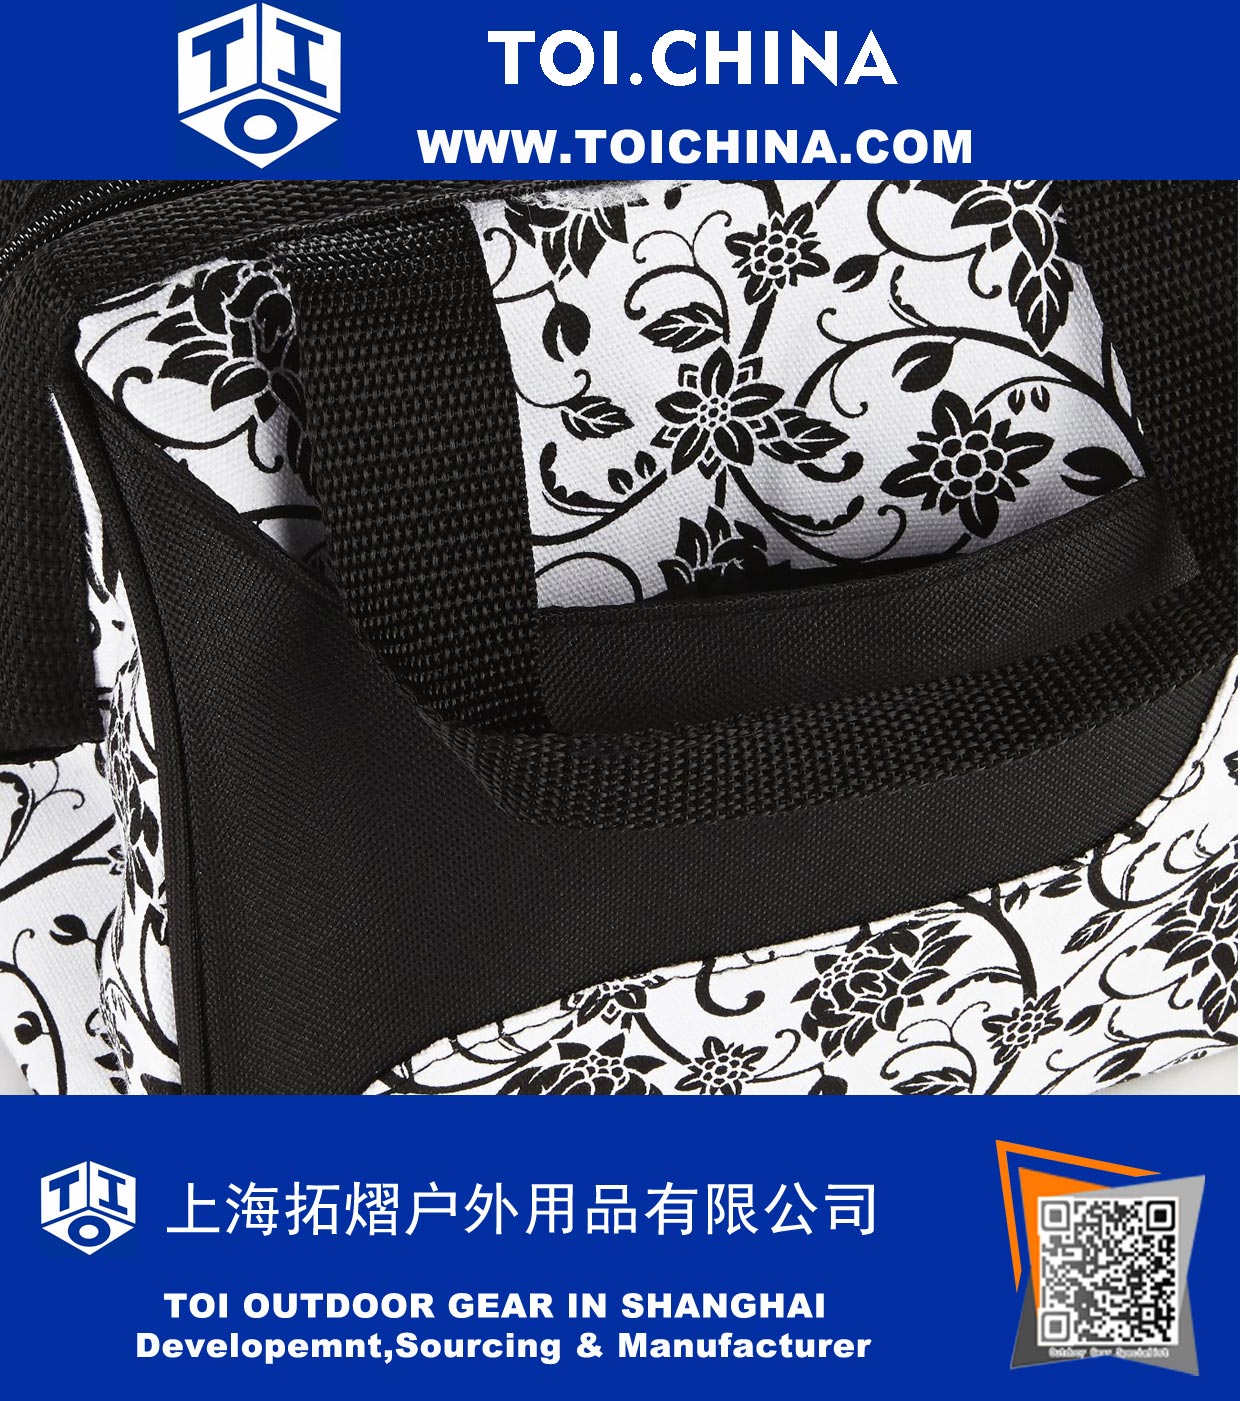 Insulated Lunch Bag with Ice Pack, Exterior Pocket with Zipper Closure